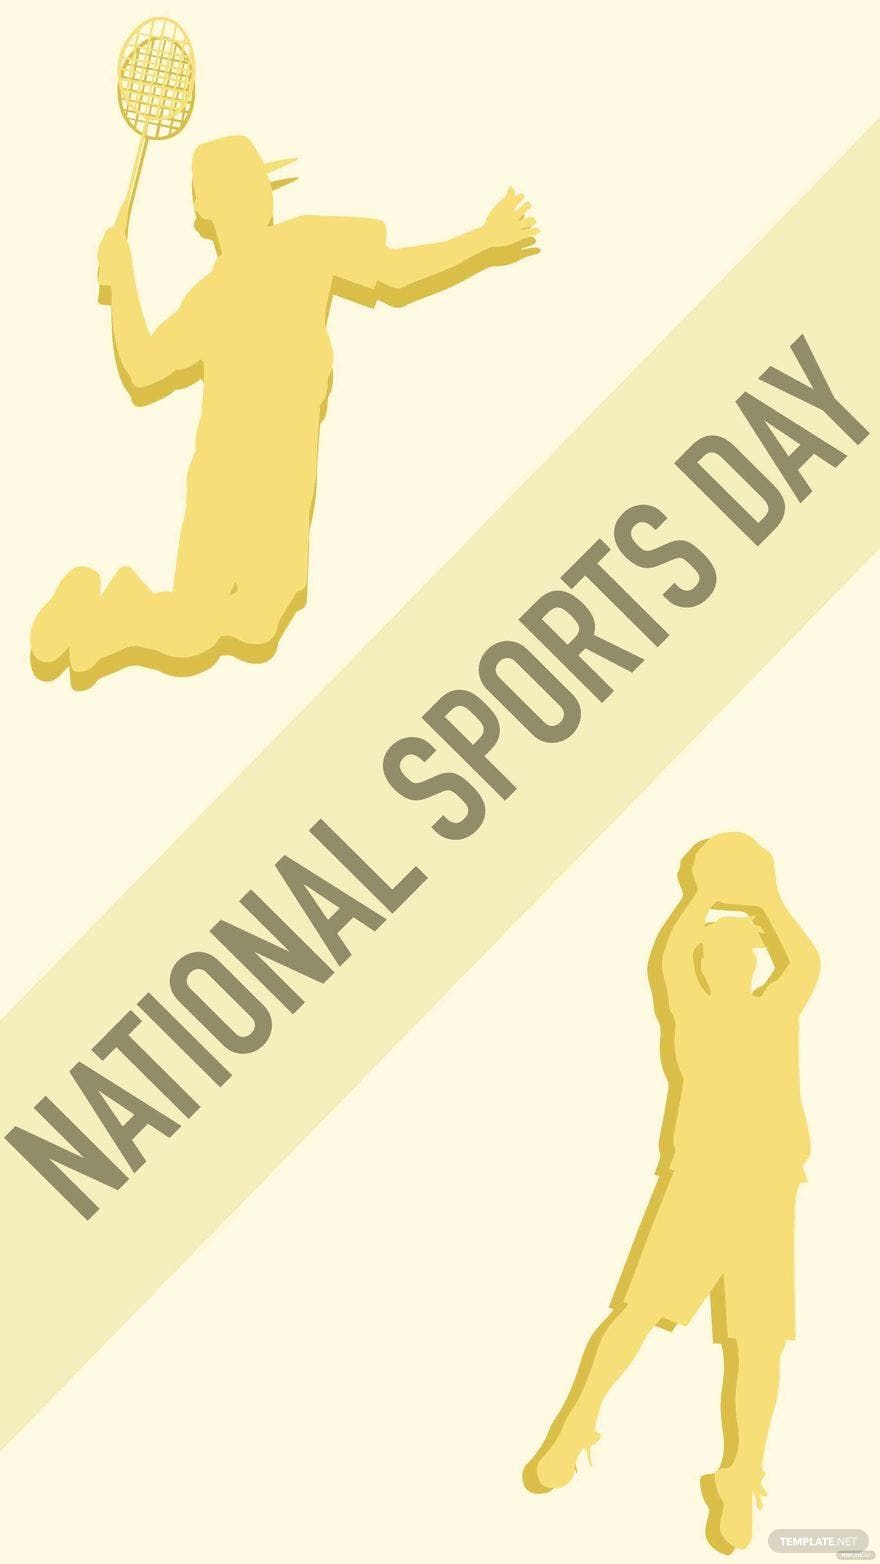 National Sports Day iPhone Background in PDF, Illustrator, PSD, EPS, SVG, JPG, PNG